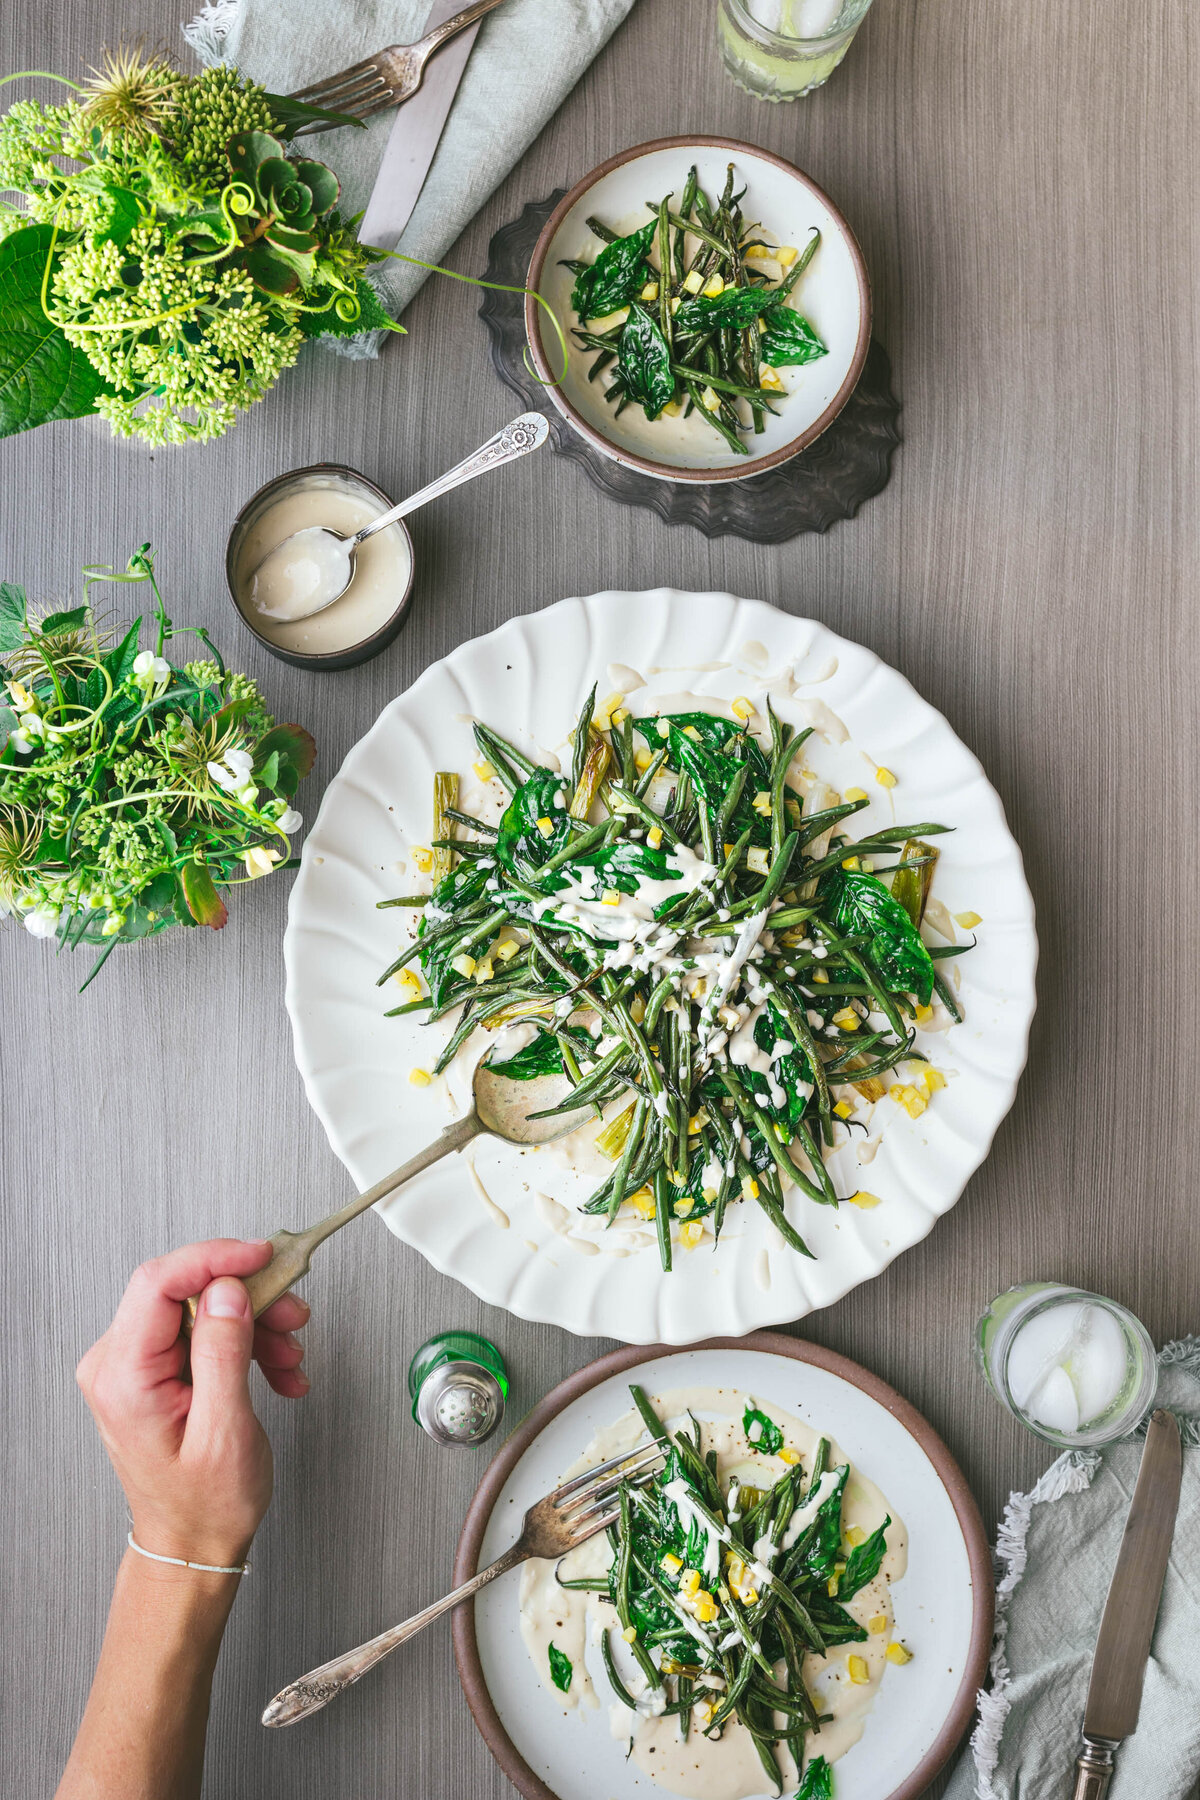 Tender fresh green beans roasted and served with preserved lemons and a lemony tahini dressing.